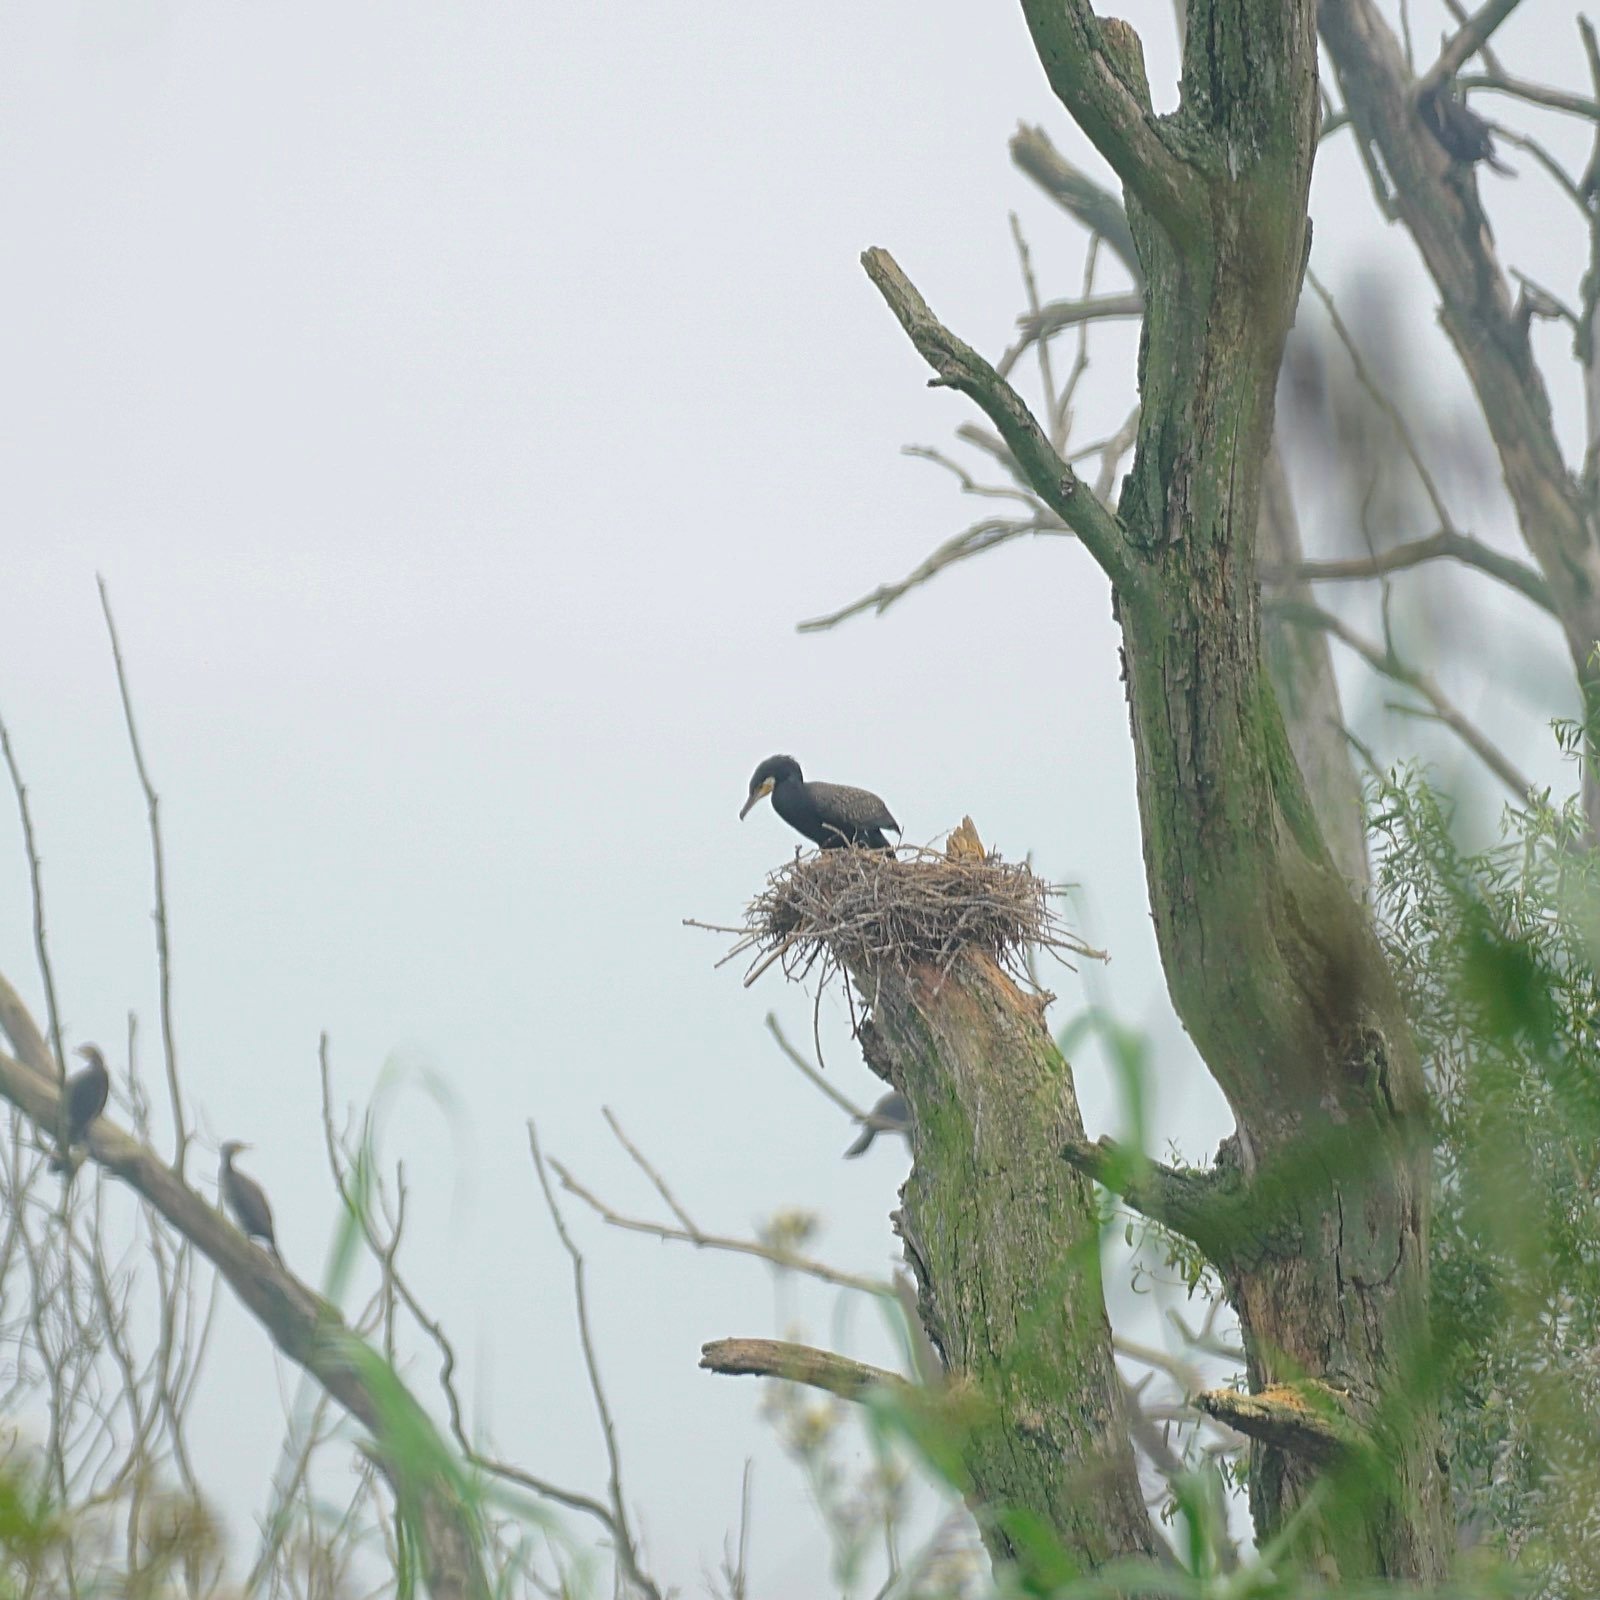 A cormorant standing in a nest on the top of a dead tree.